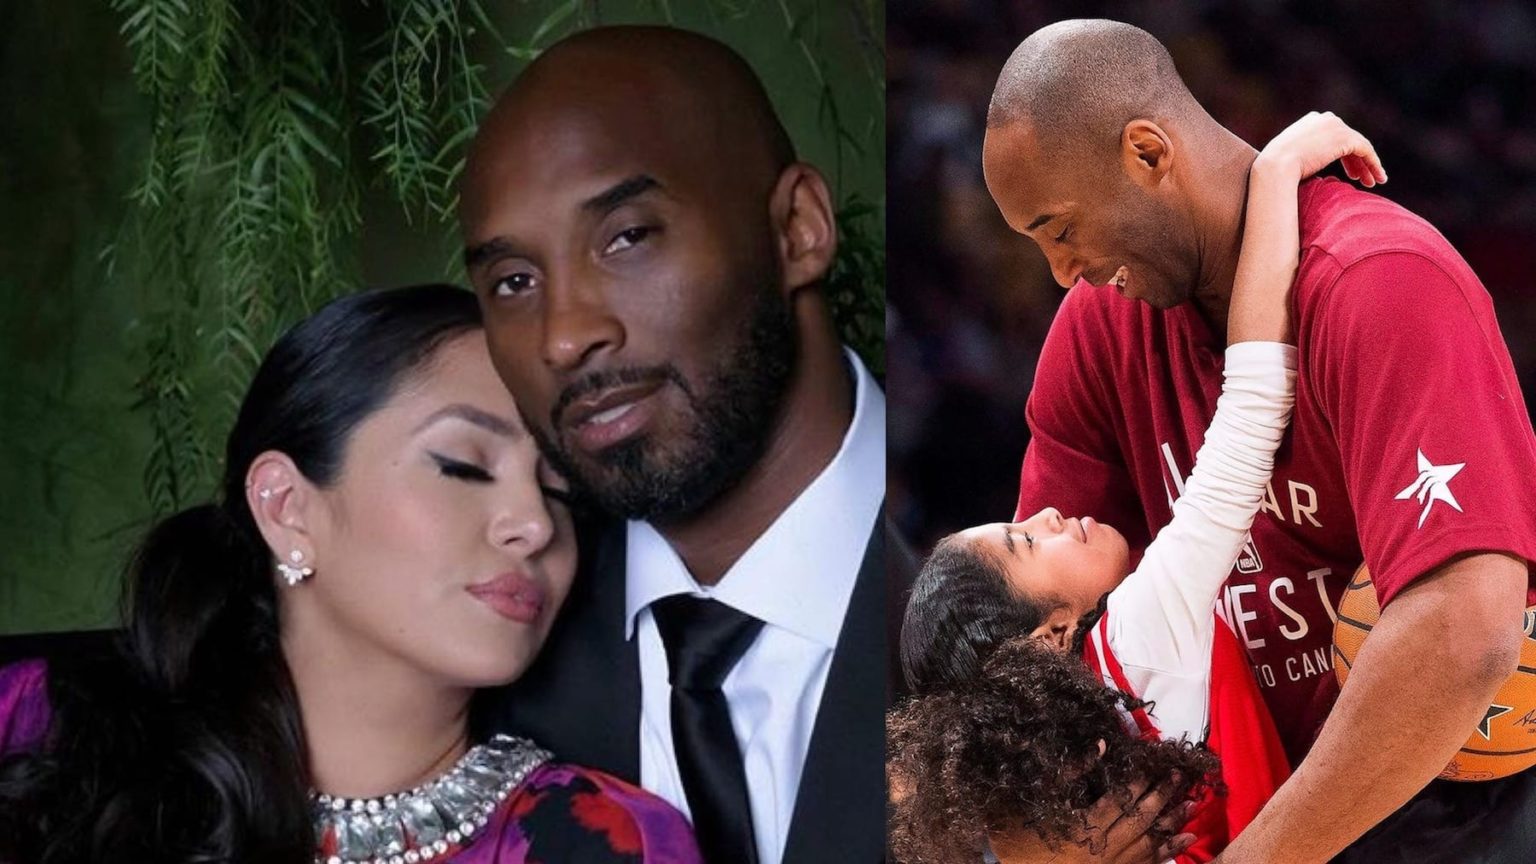 Vanessa Bryant Shares Heartrending Photo Of Kobe And Gianna On Instagram As First Public